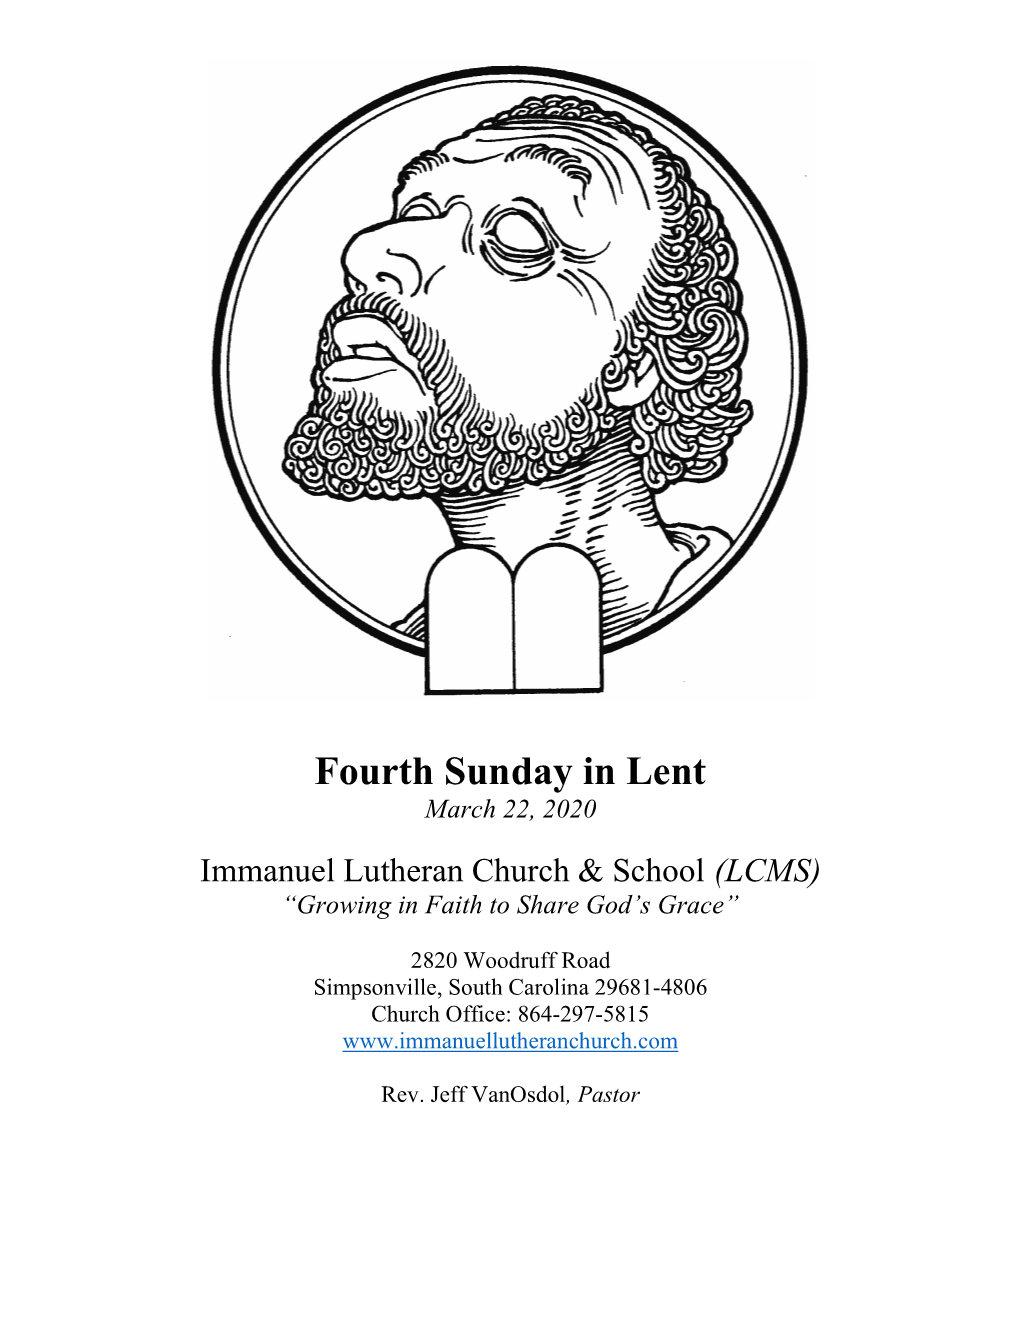 Fourth Sunday in Lent March 22, 2020